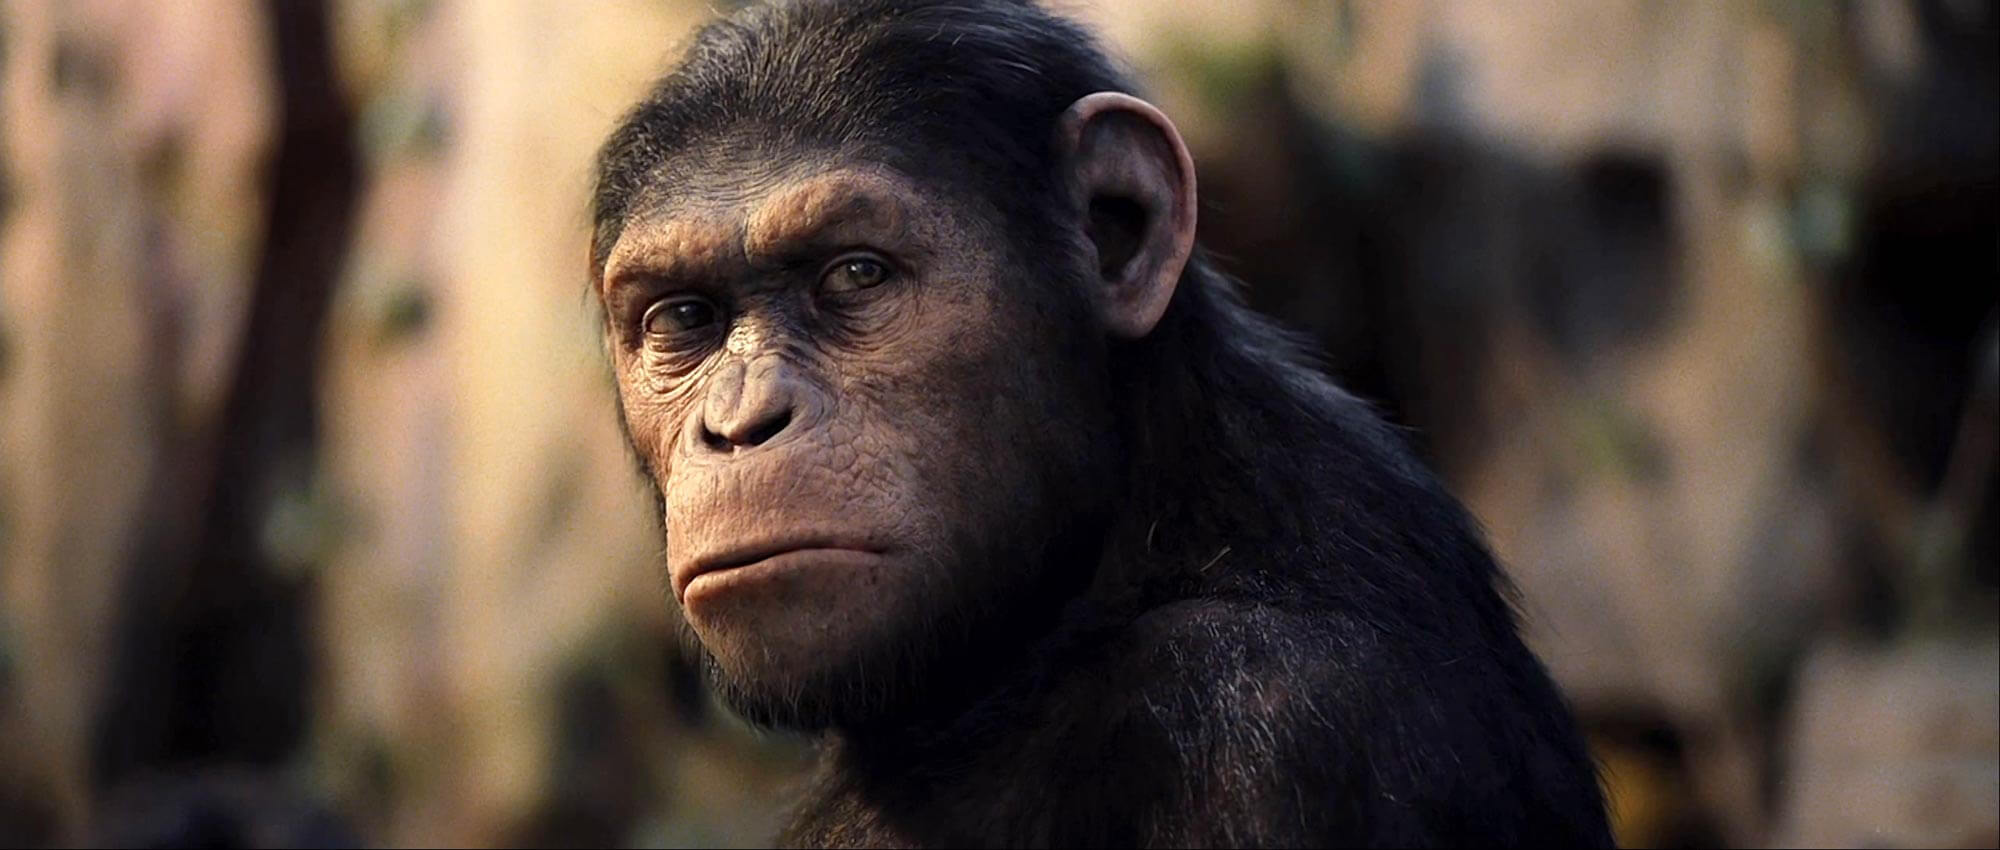 High Resolution Wallpaper | Rise Of The Planet Of The Apes 2000x850 px